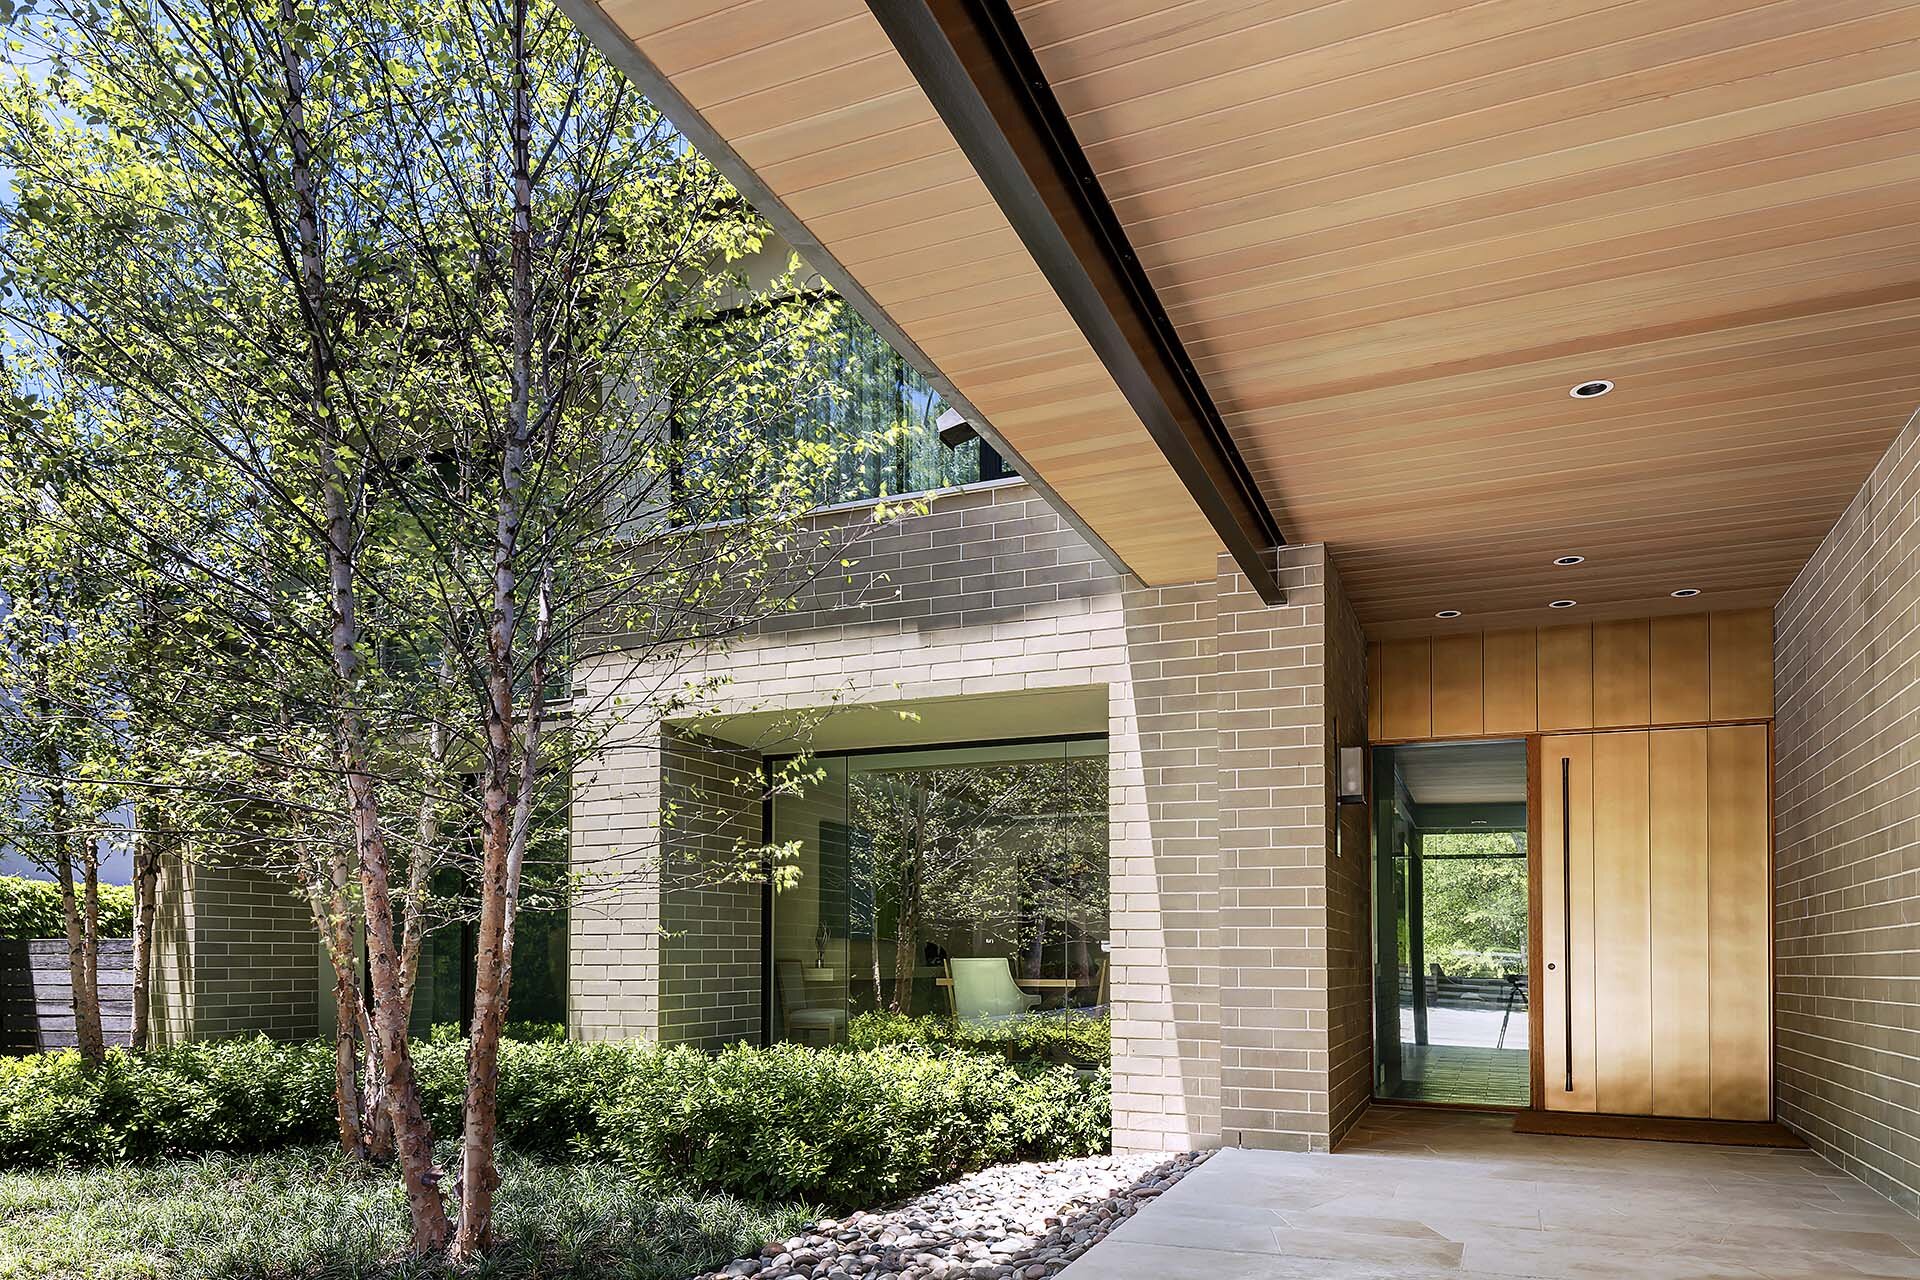  Modern comfortable contemporary home in Park Cities Dallas Texas designed by Bernbaum/Magadini Architects 